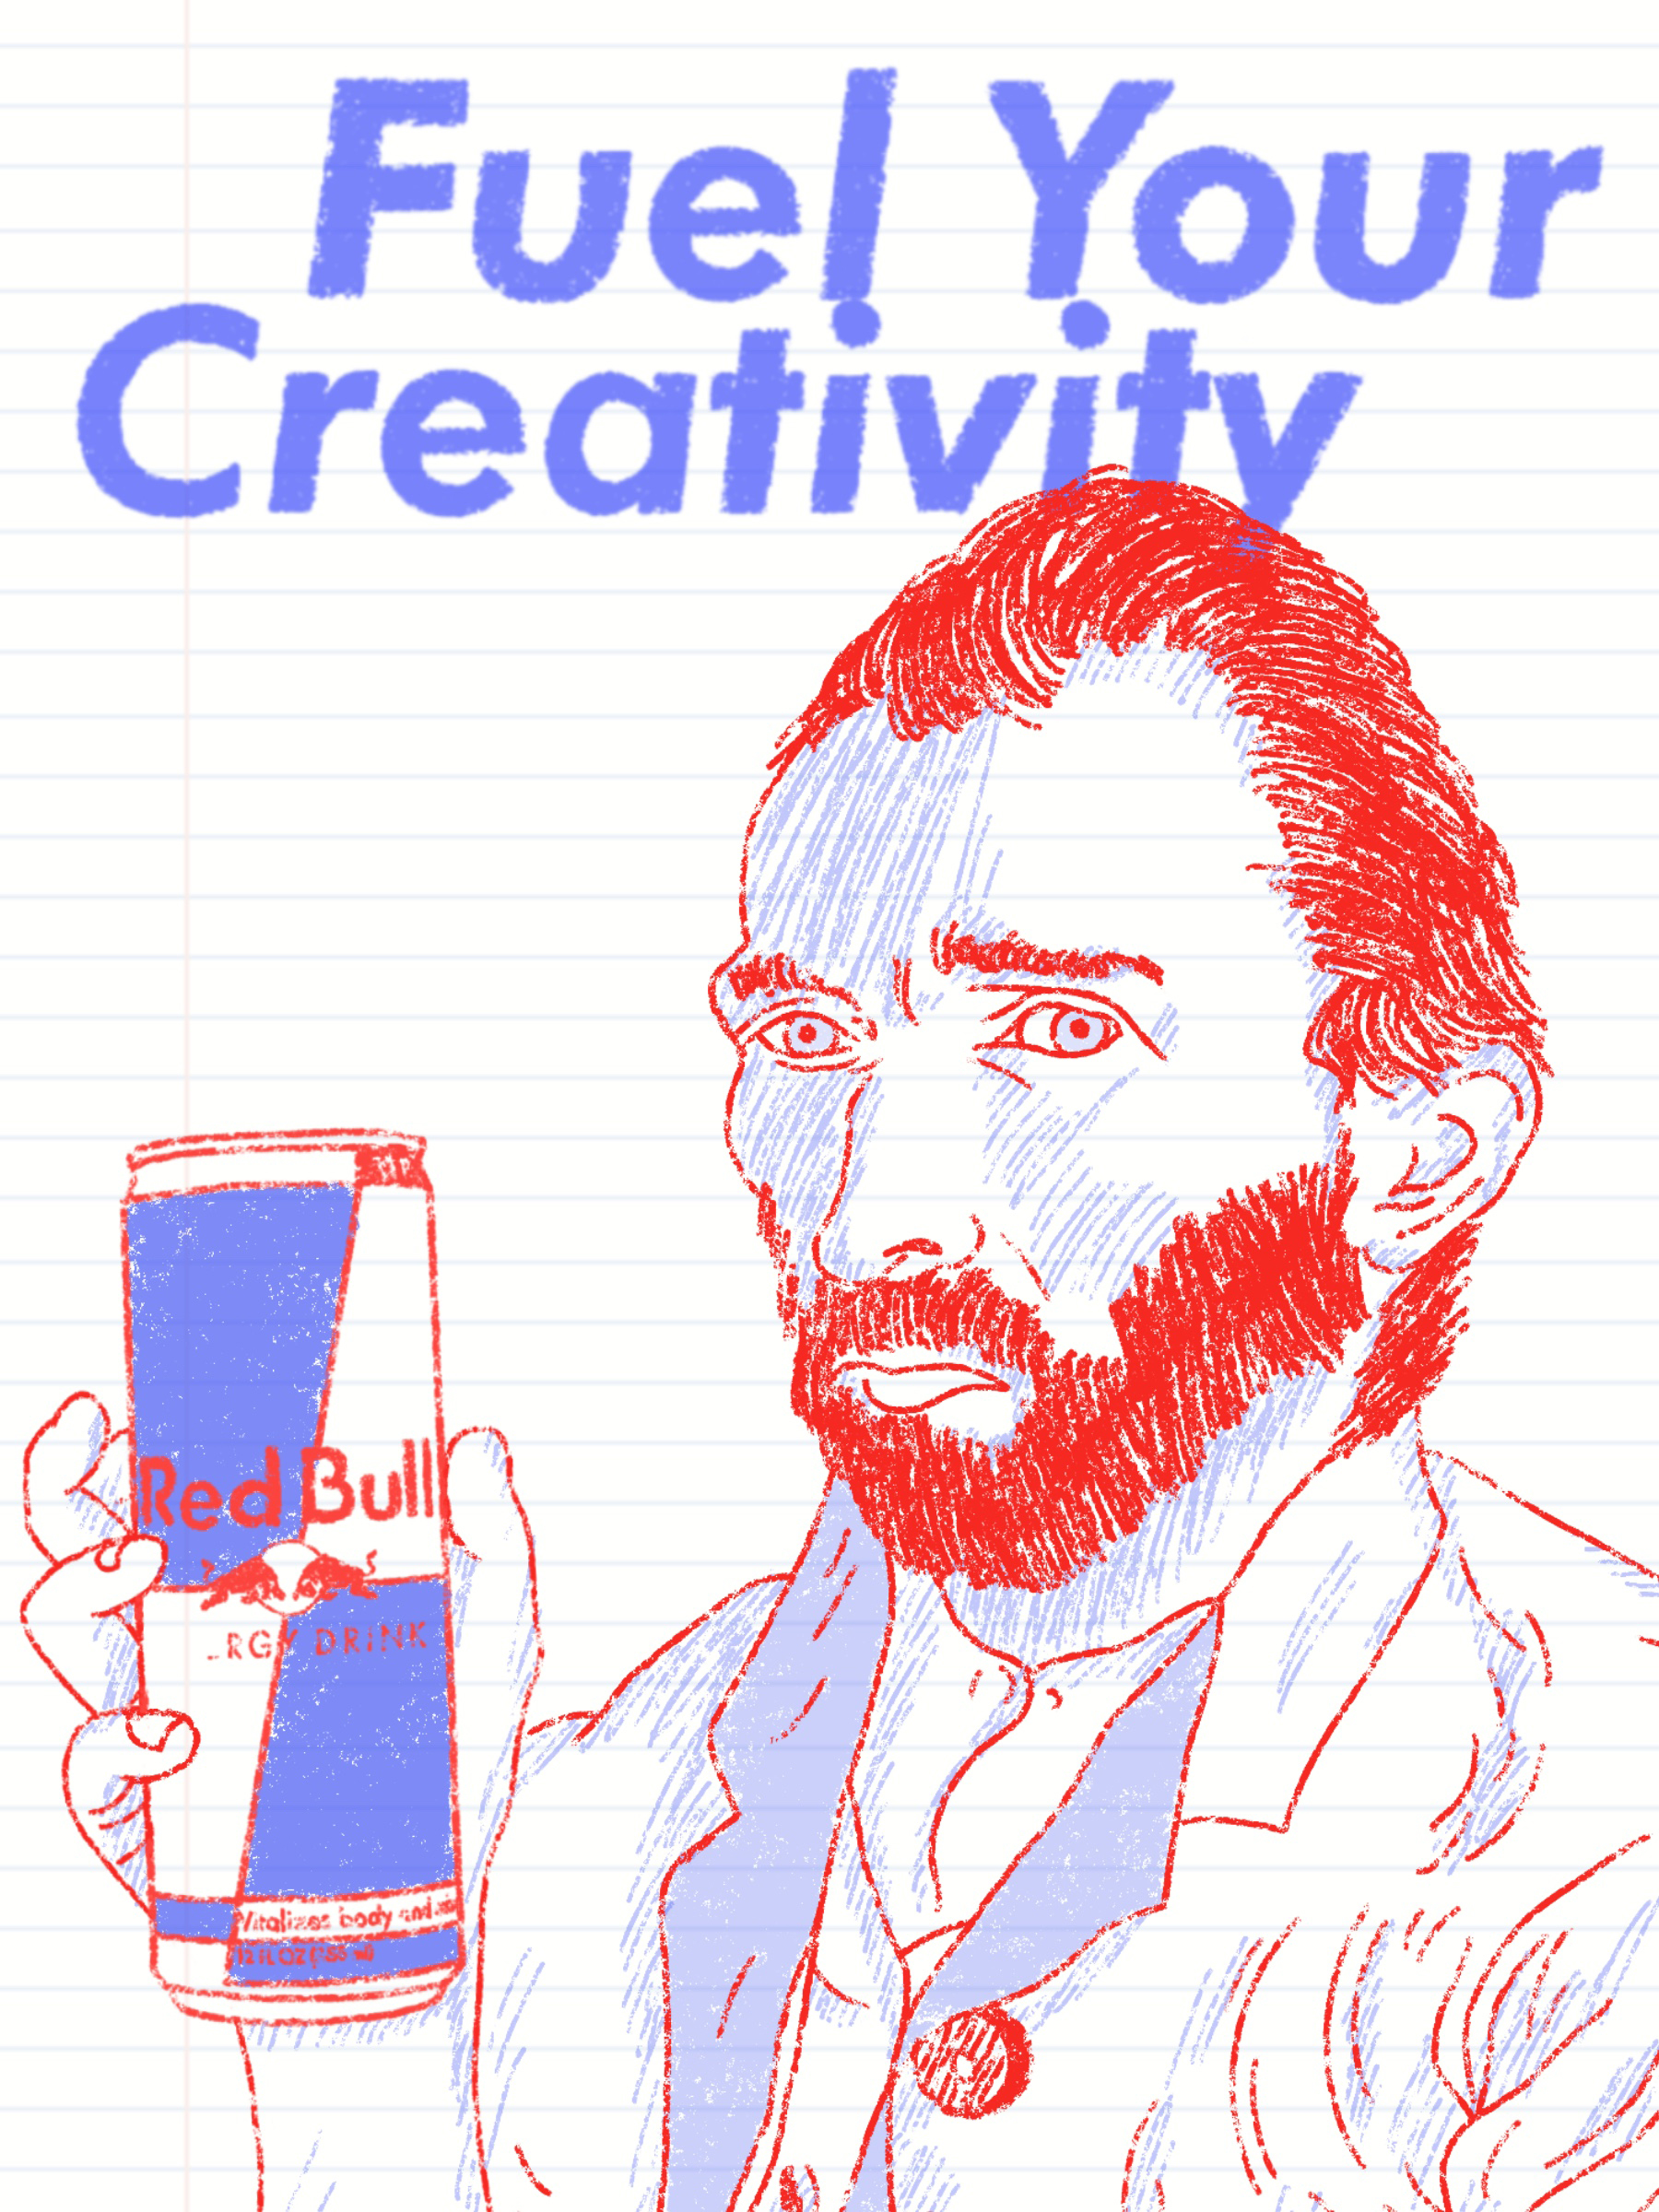 Red Bull ad featuring Vincent Van Gough 